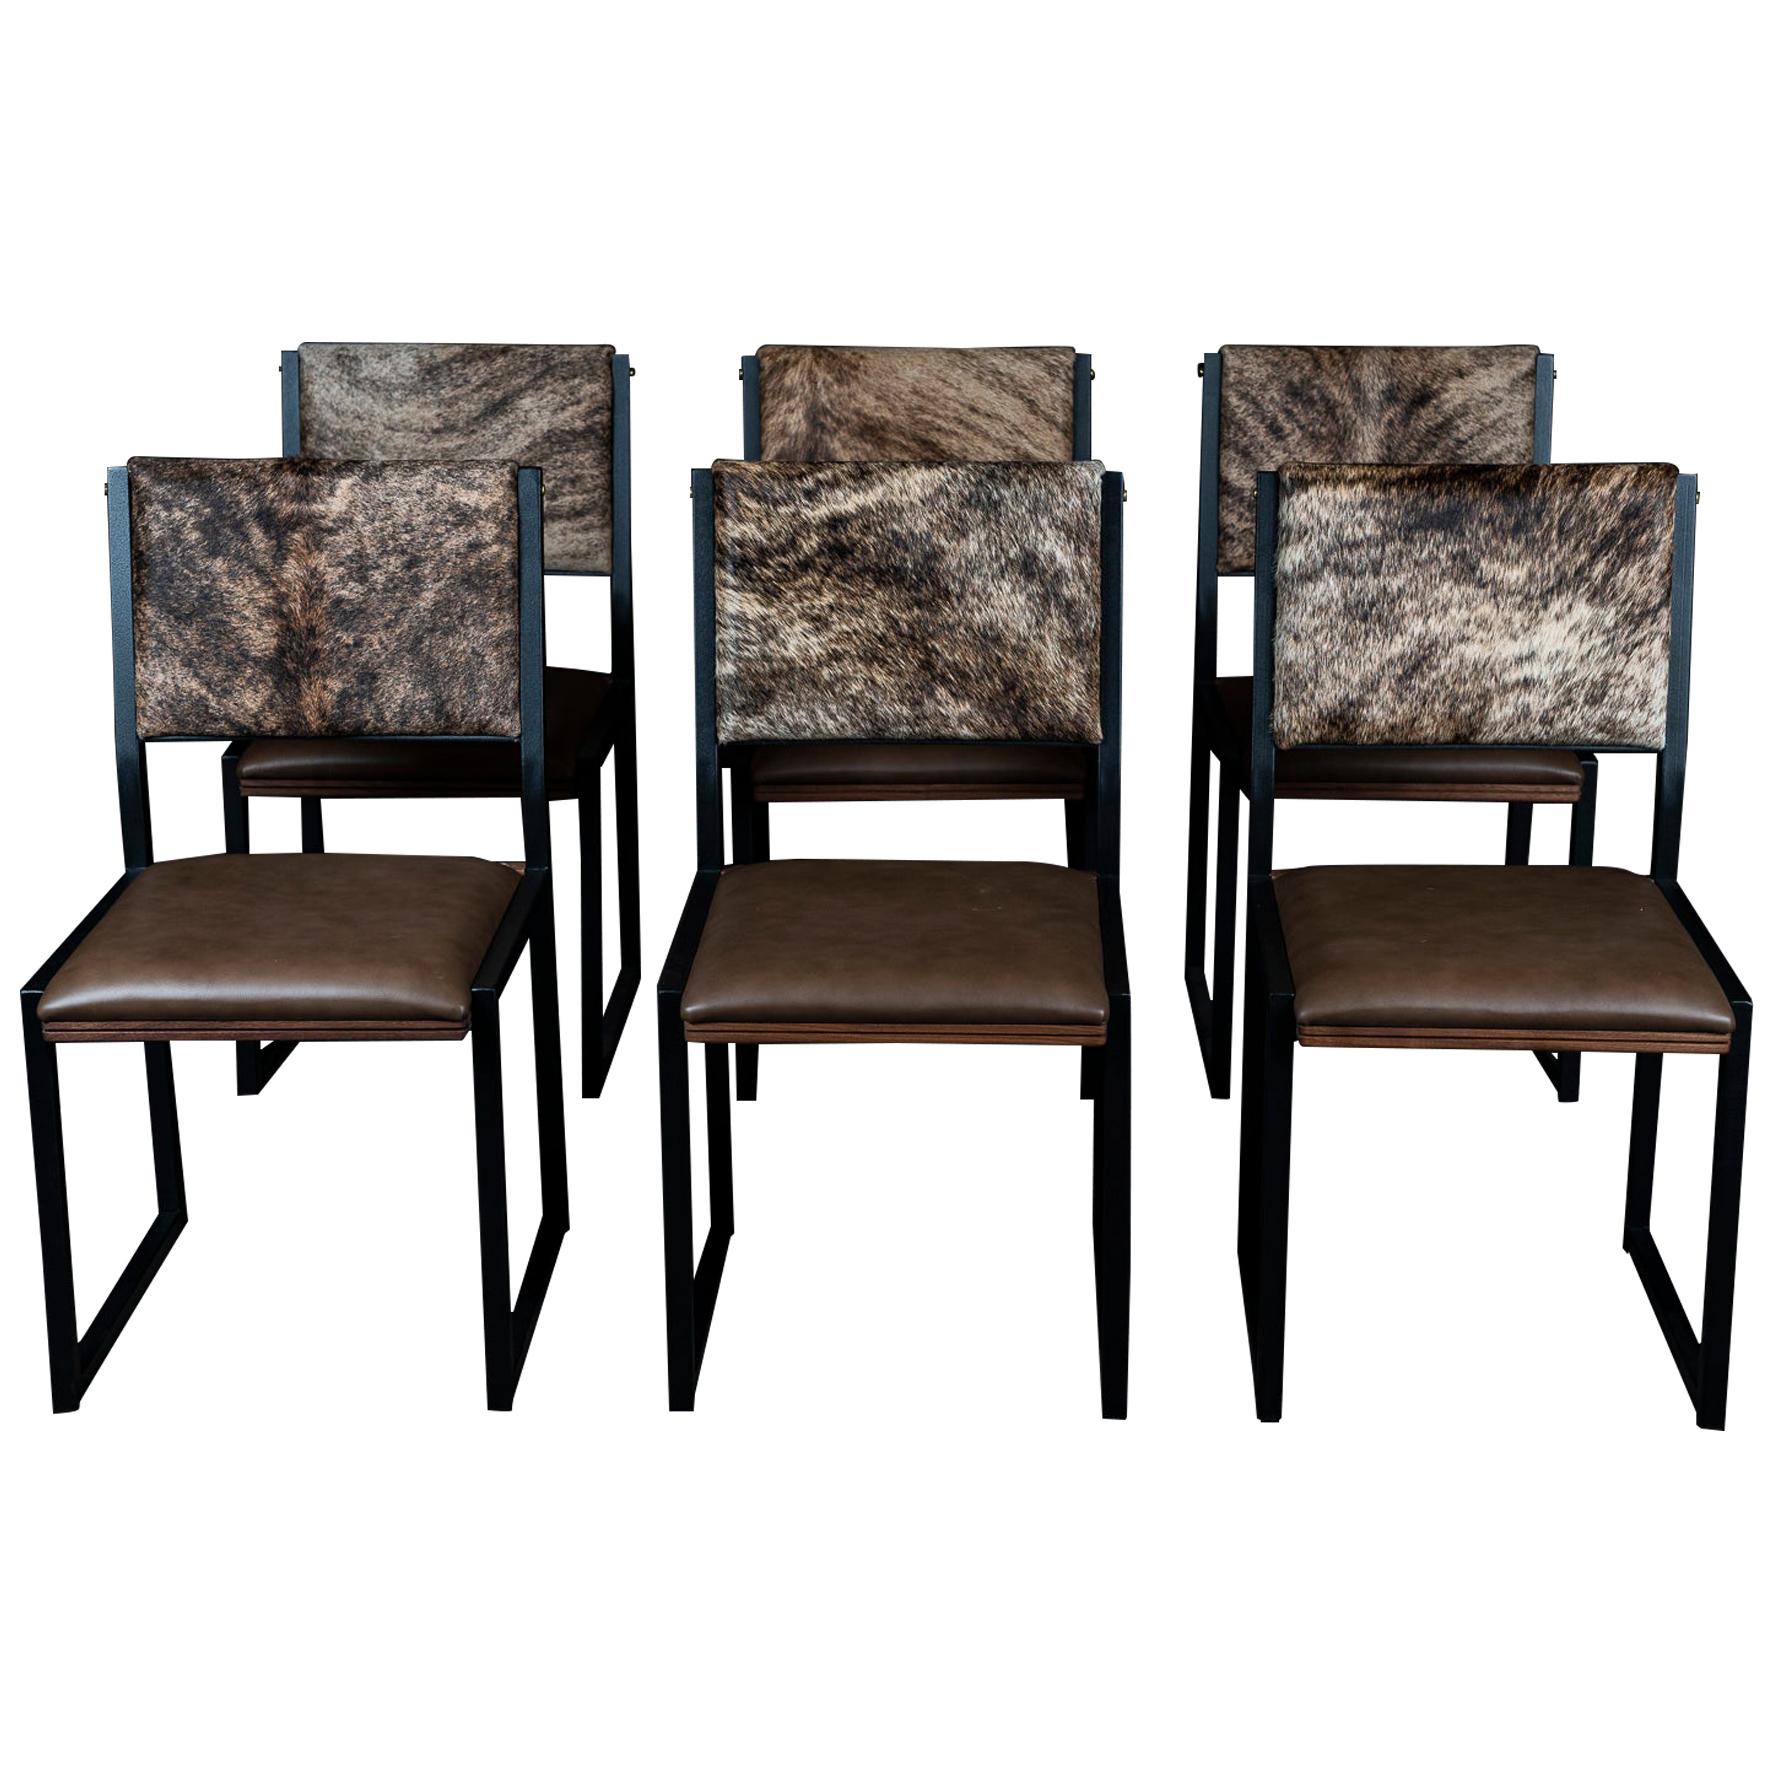 6x Shaker Modern Chair by Ambrozia, Walnut, Brown Leather, Brown Brindle Cowhide For Sale